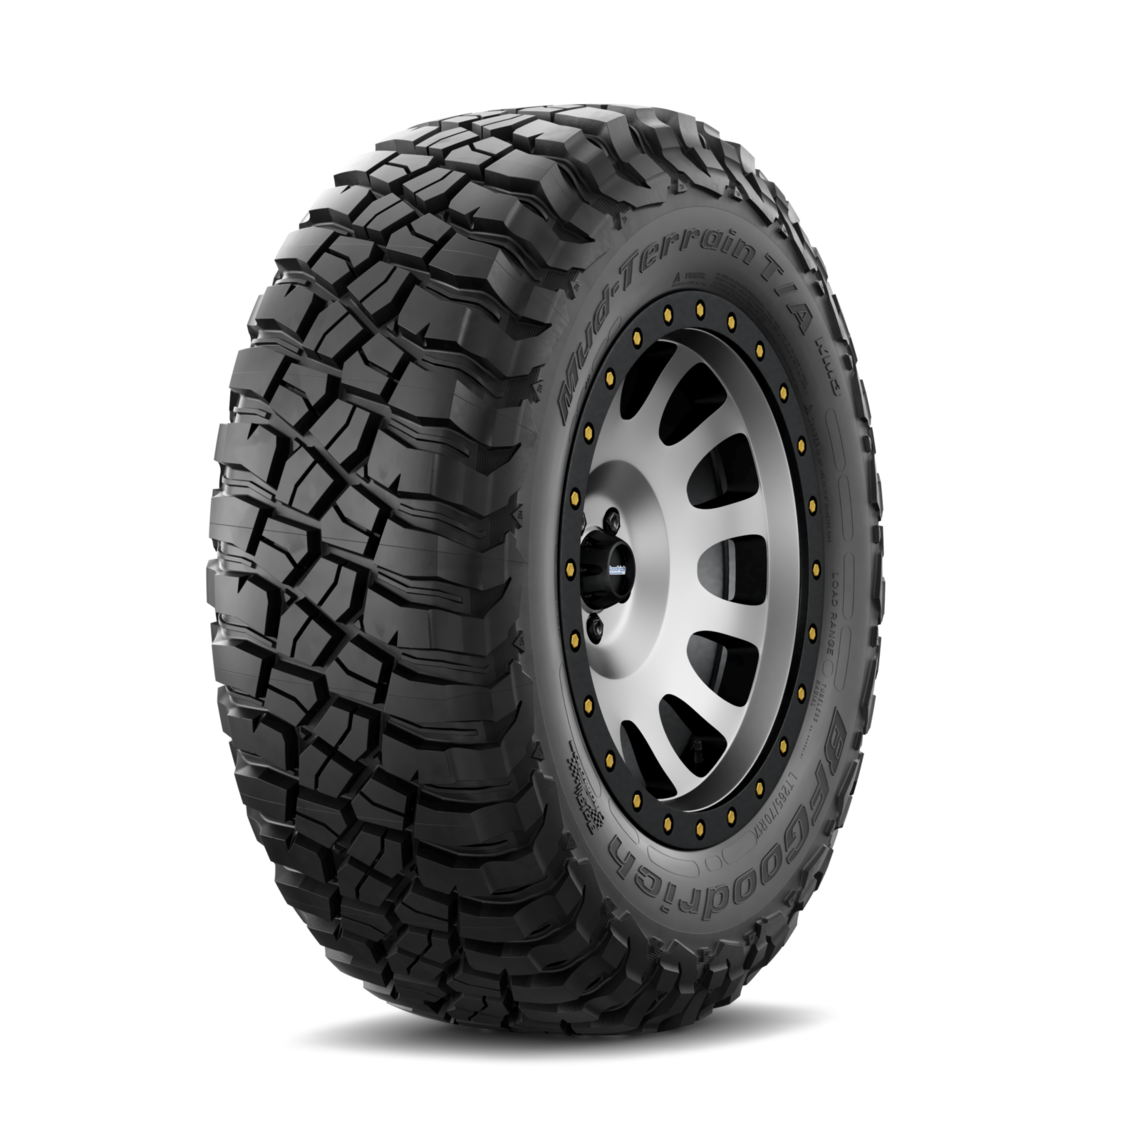 TM Official Tire Rests Wide Size 